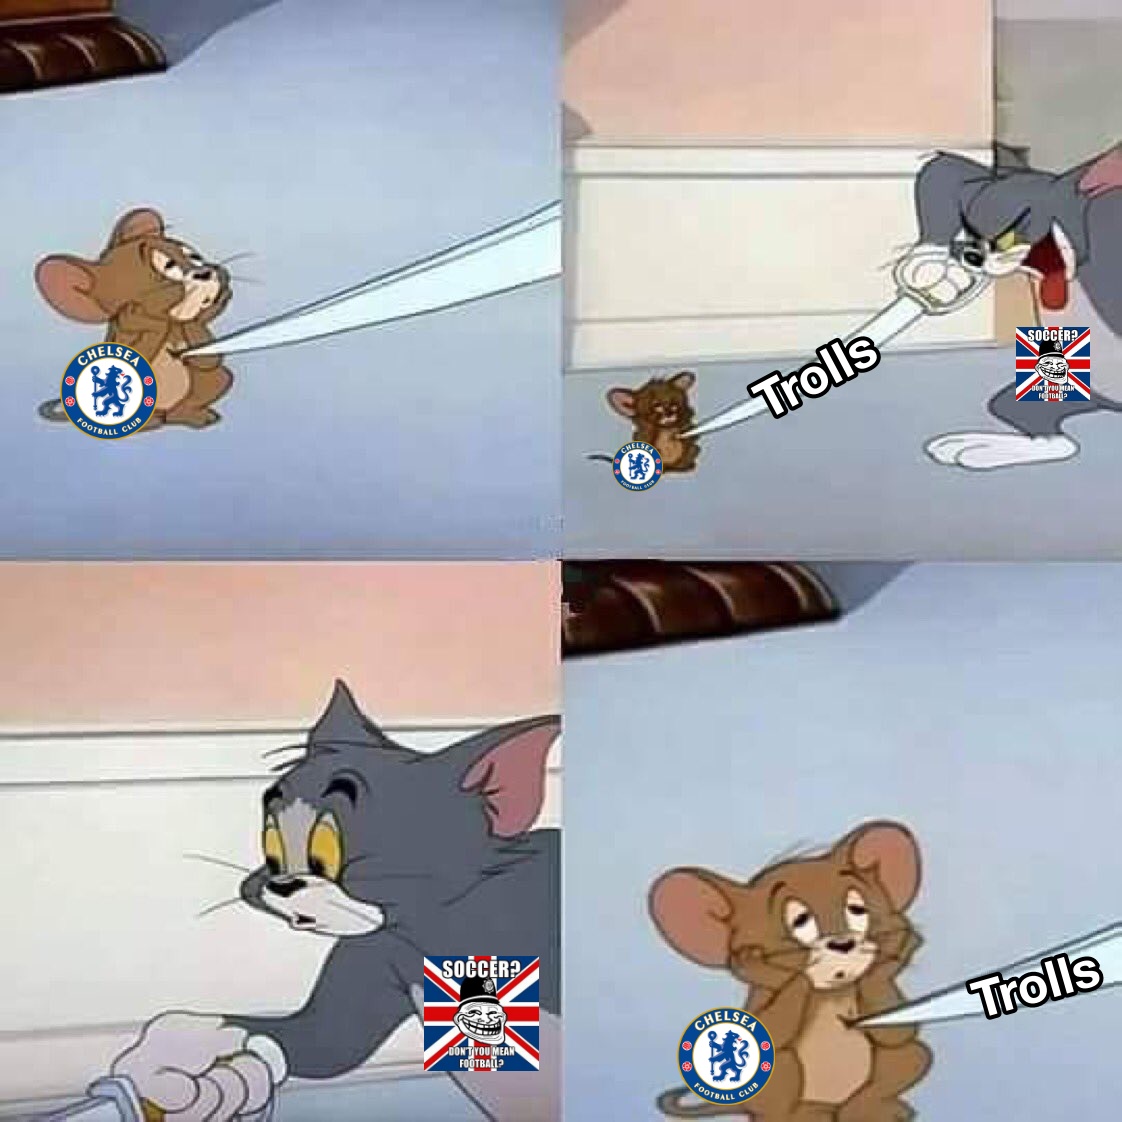 Trolling Chelsea is like trolling Luton Town these days.